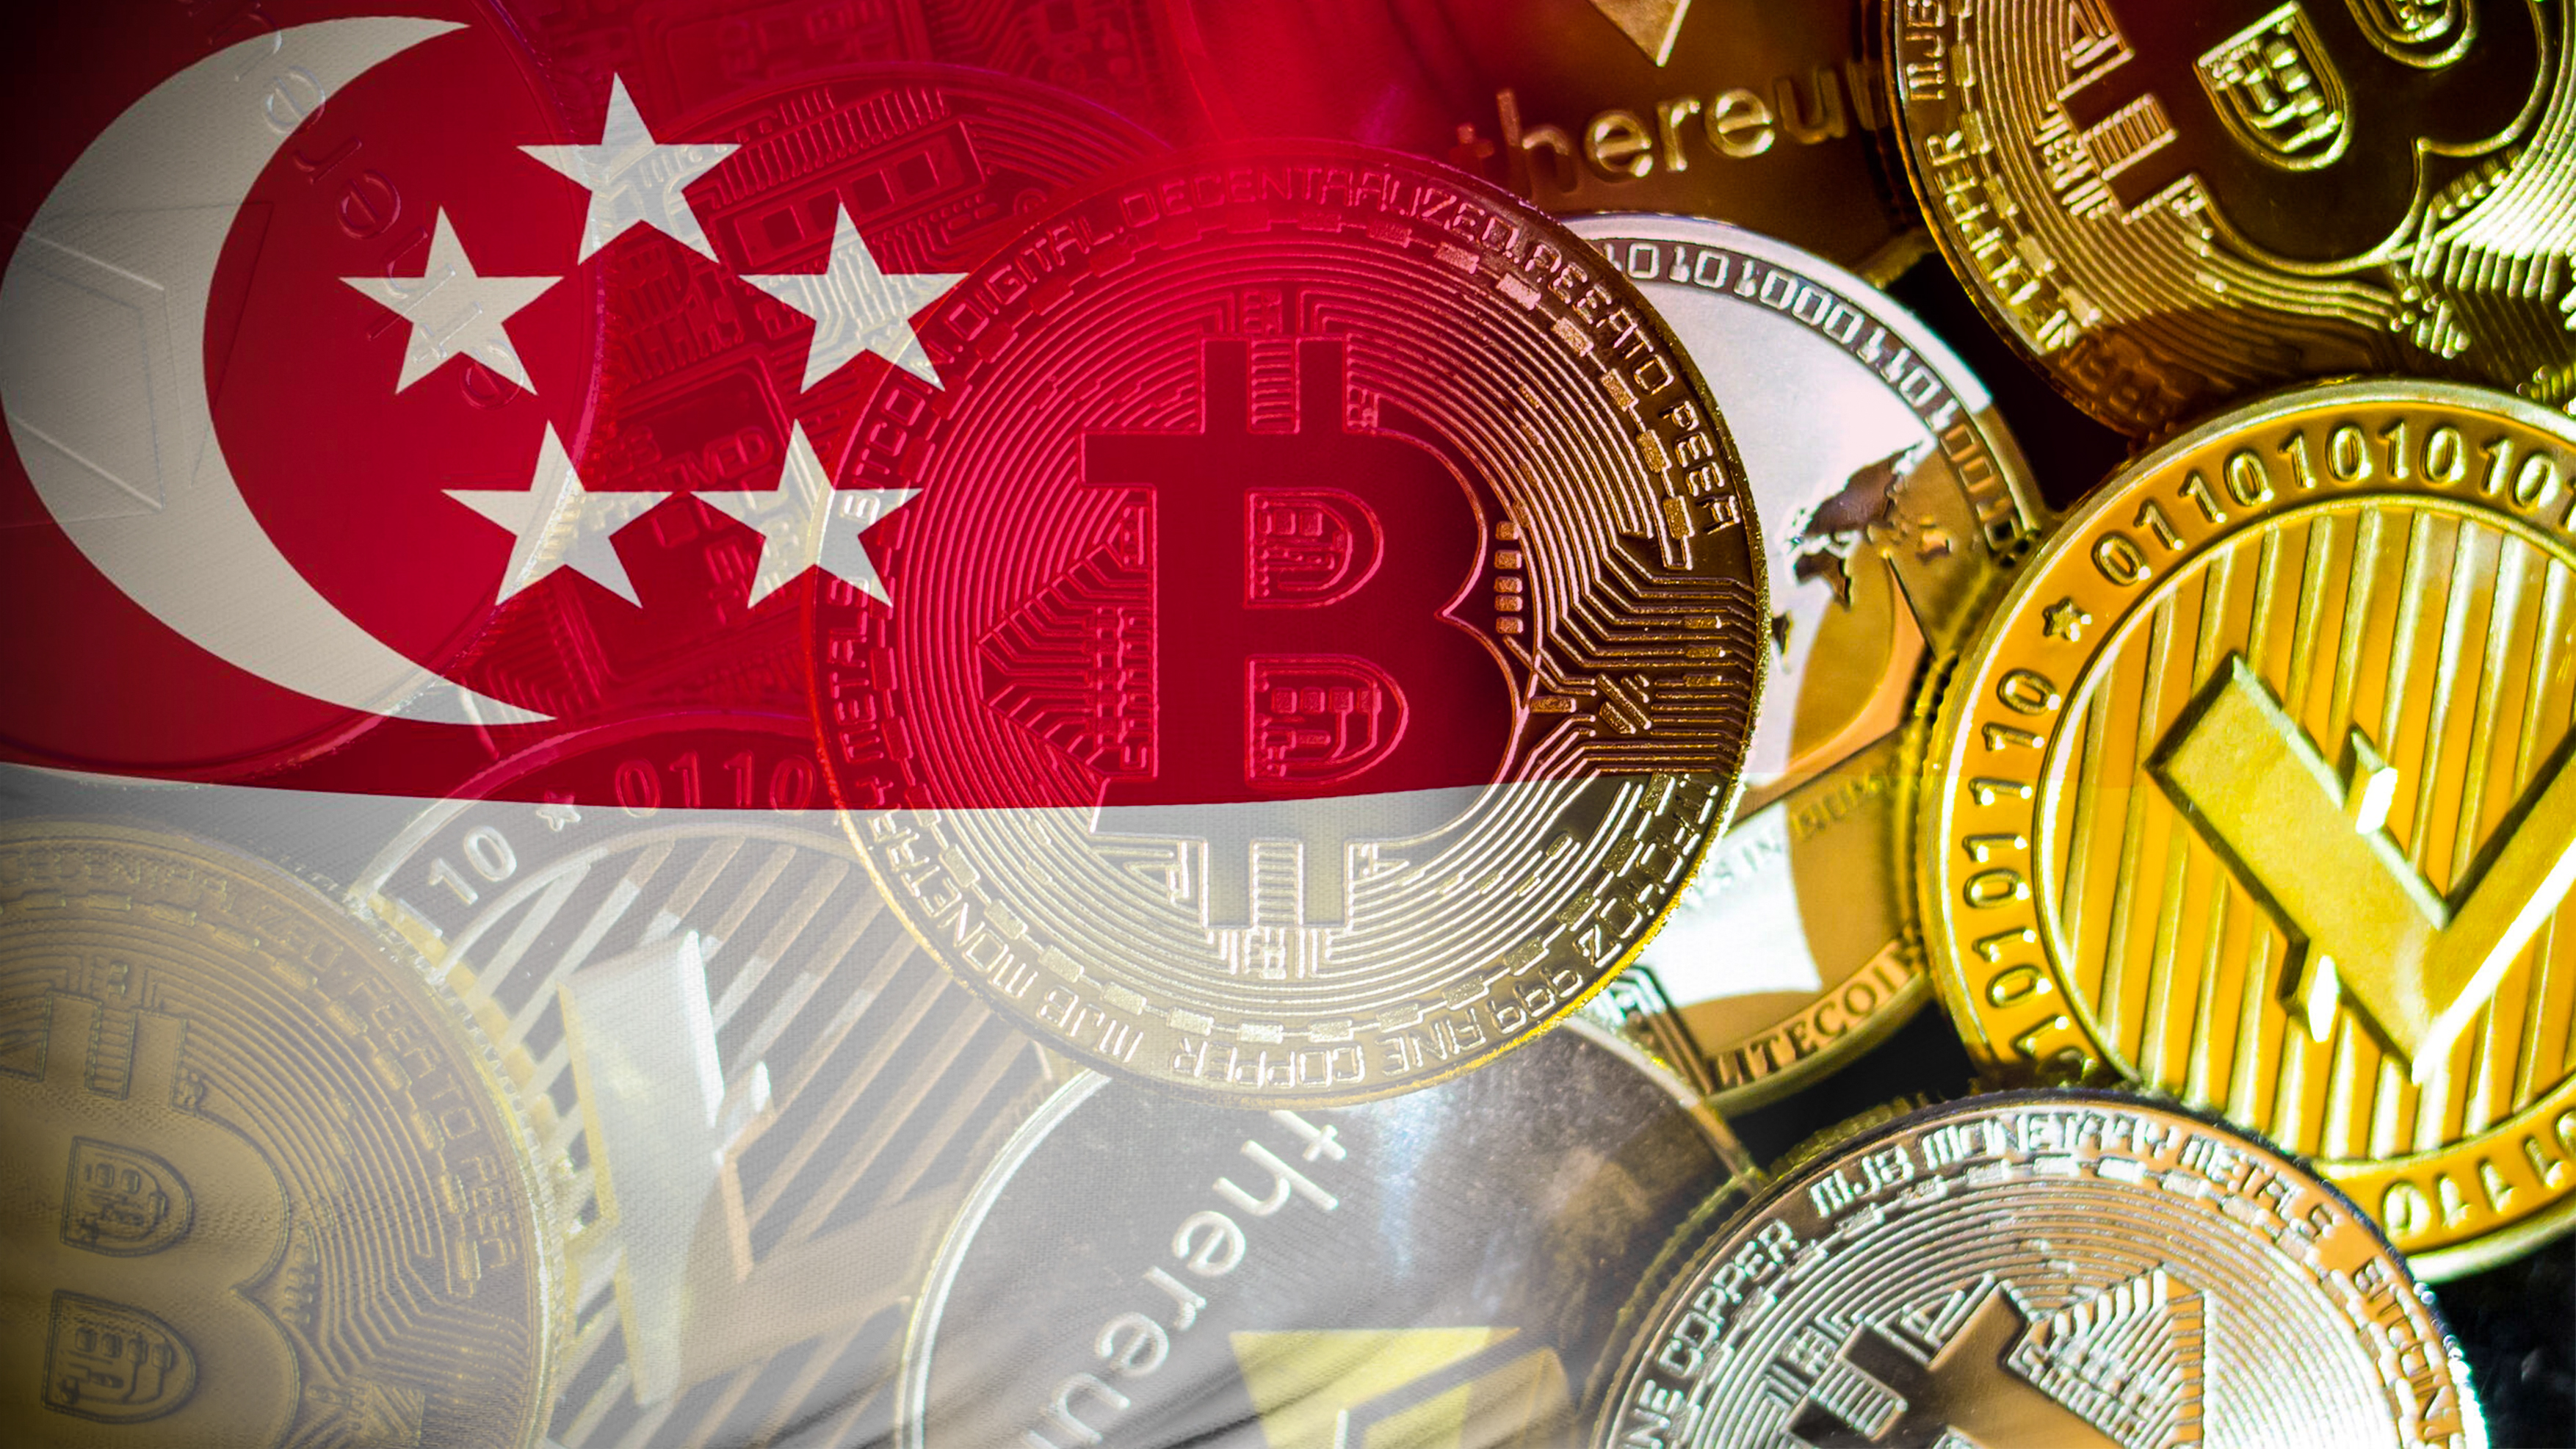 Singapore’s story as the centre of Asia’s crypto hub